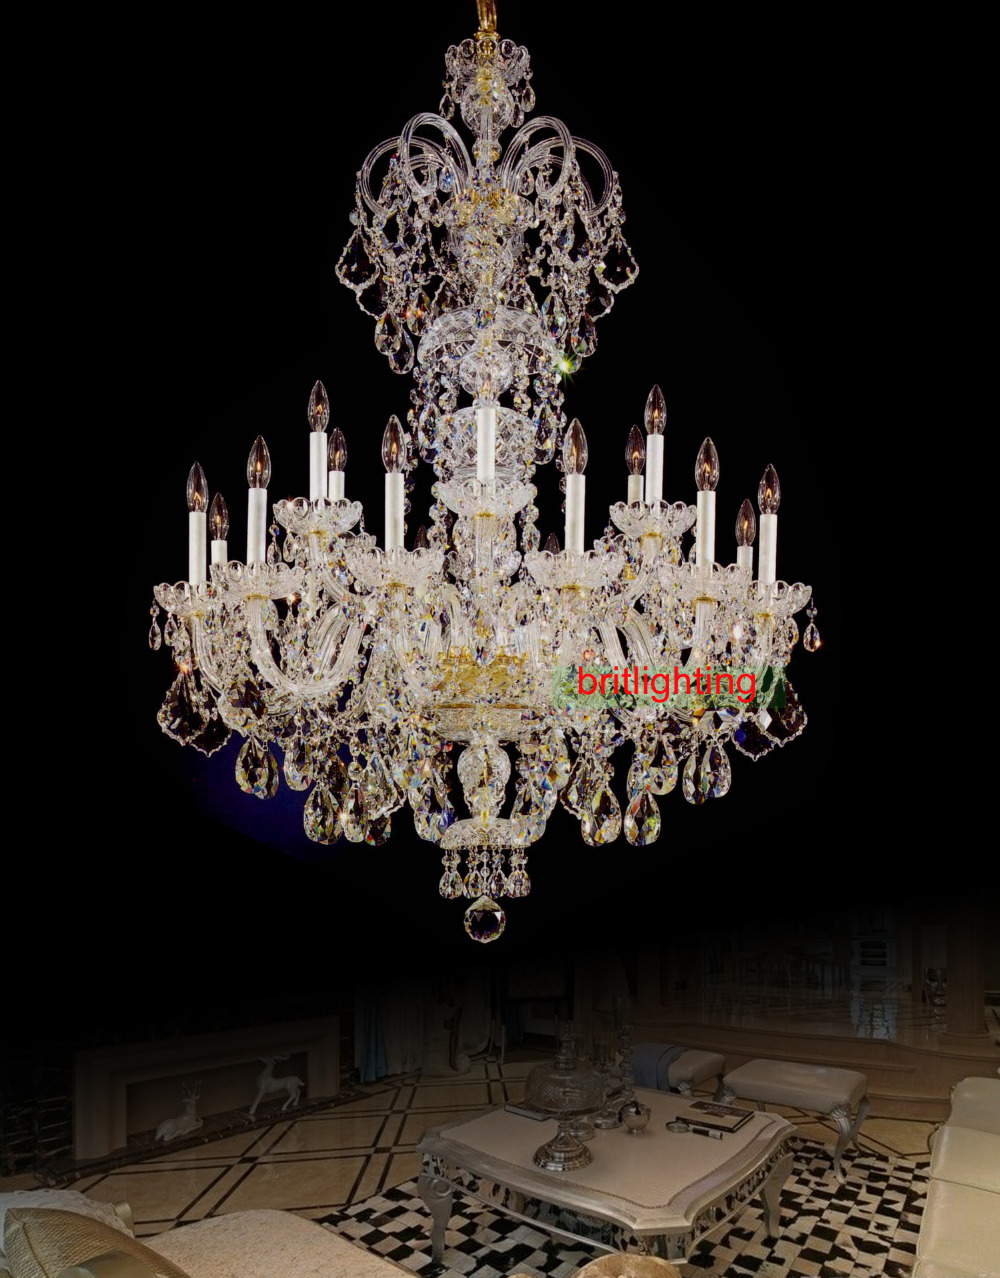 modern big chandelier lamps indoor chandelier for the kitchen home lighting decoration bohemian crystal chandelier with crystals